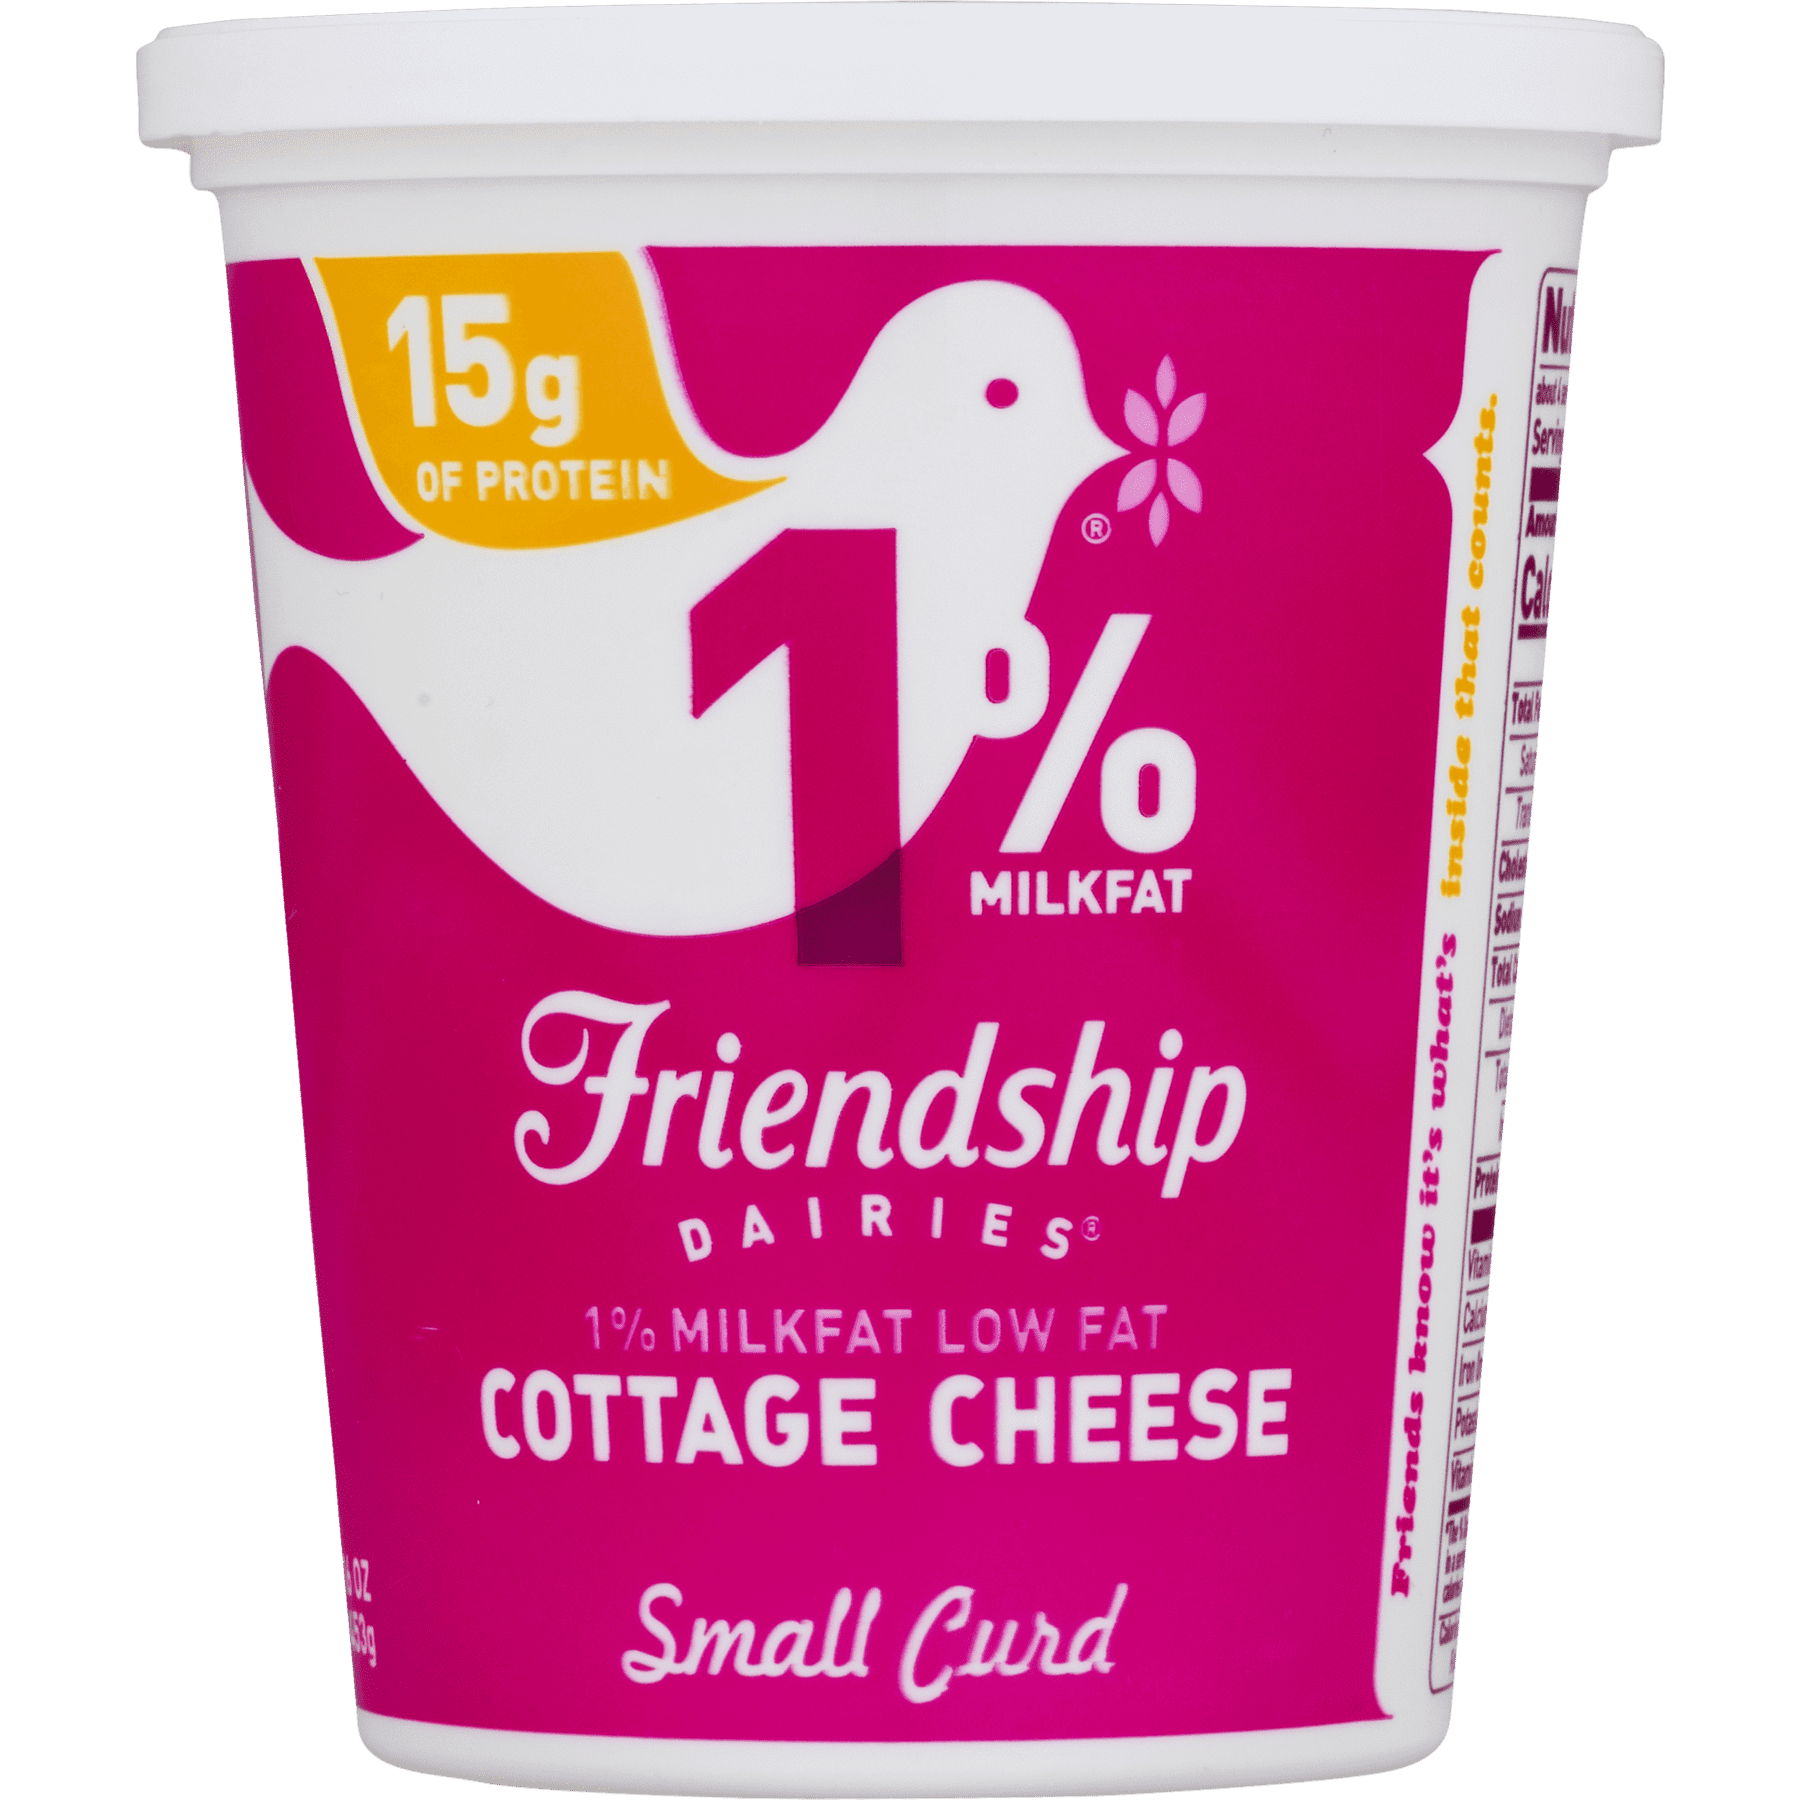 Friendship Dairies 1 Milk Fat Low Fat Small Curd Cottage Cheese